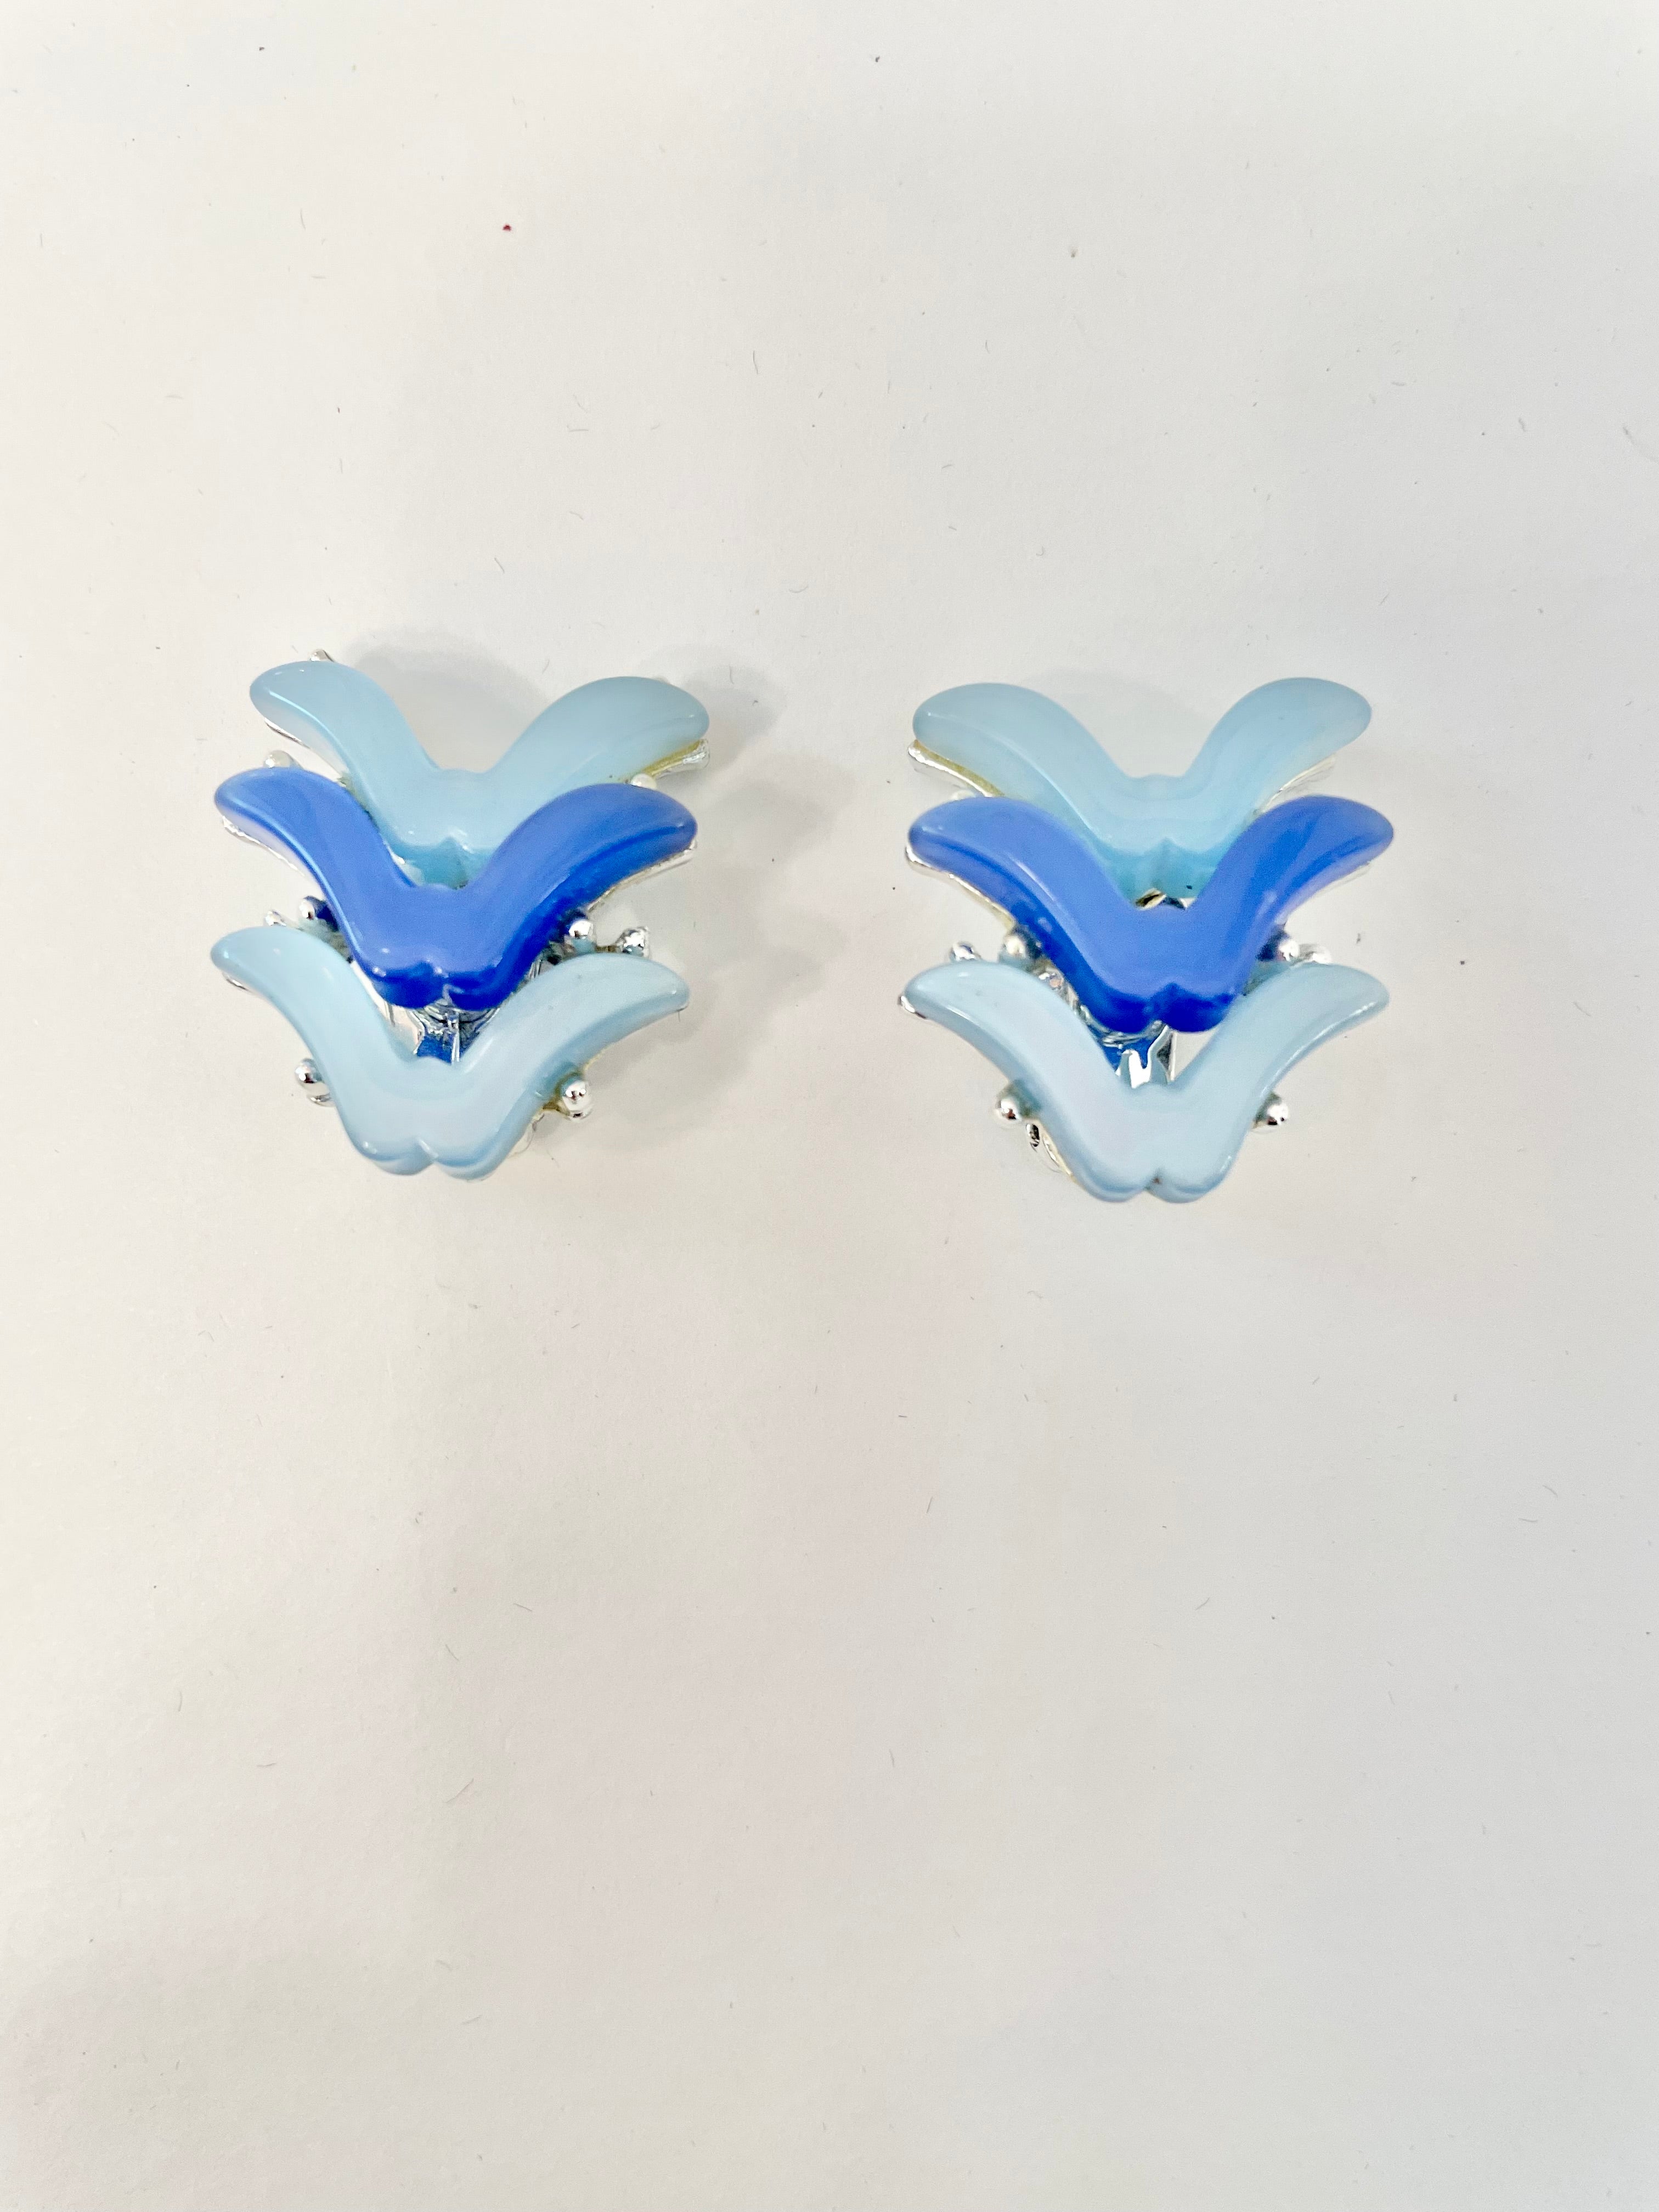 Happy Hostess and her love affair with the colorful... These 1960's soft blue sculptural delights are divine!